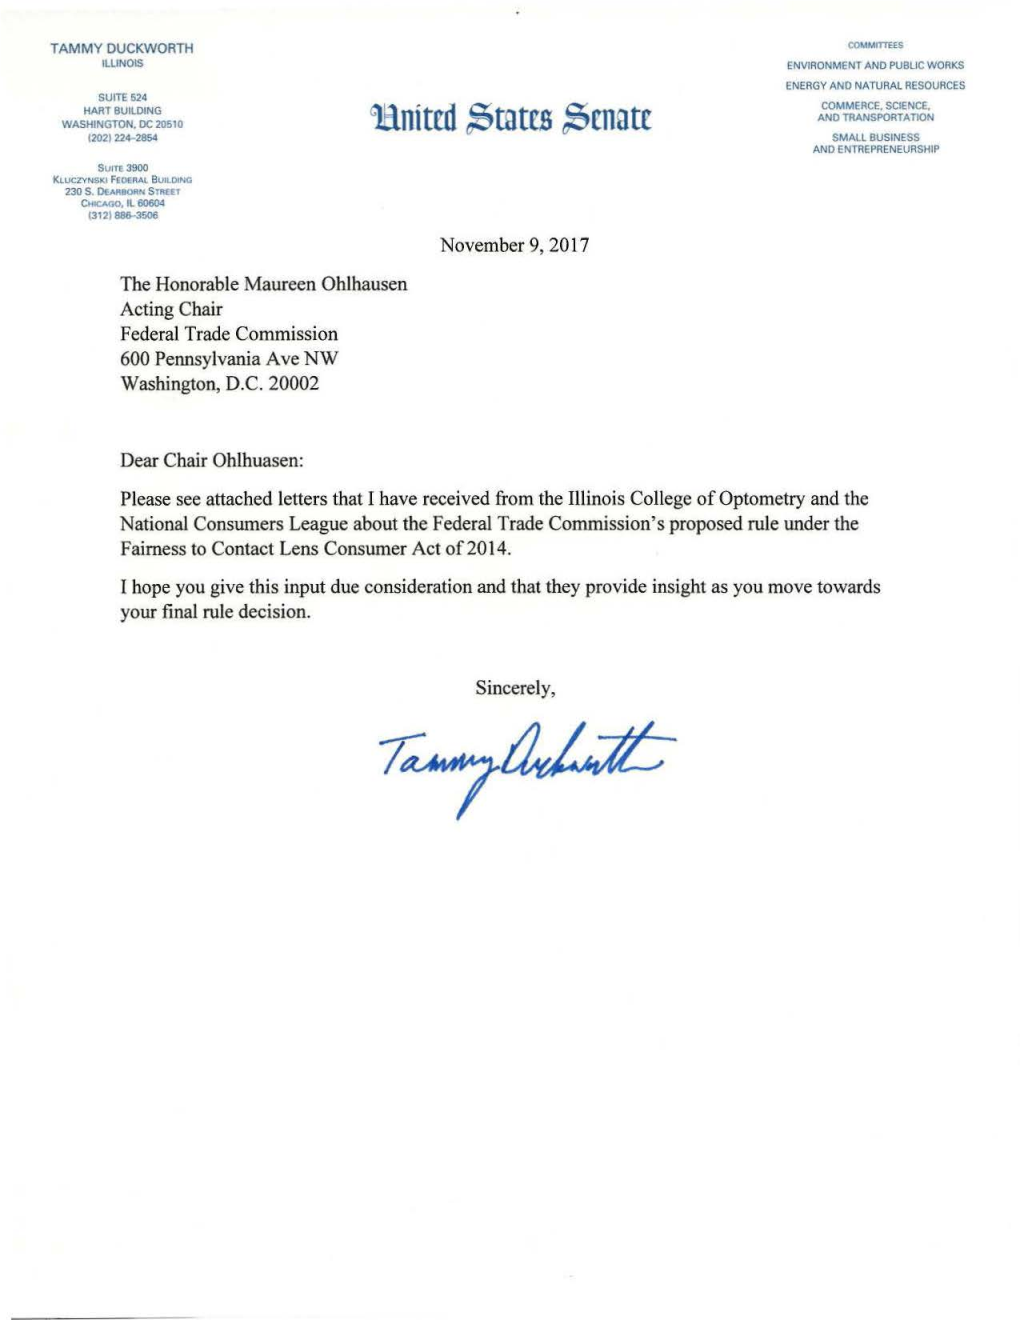 Letter from Senator Tammy Duckworth of the United States